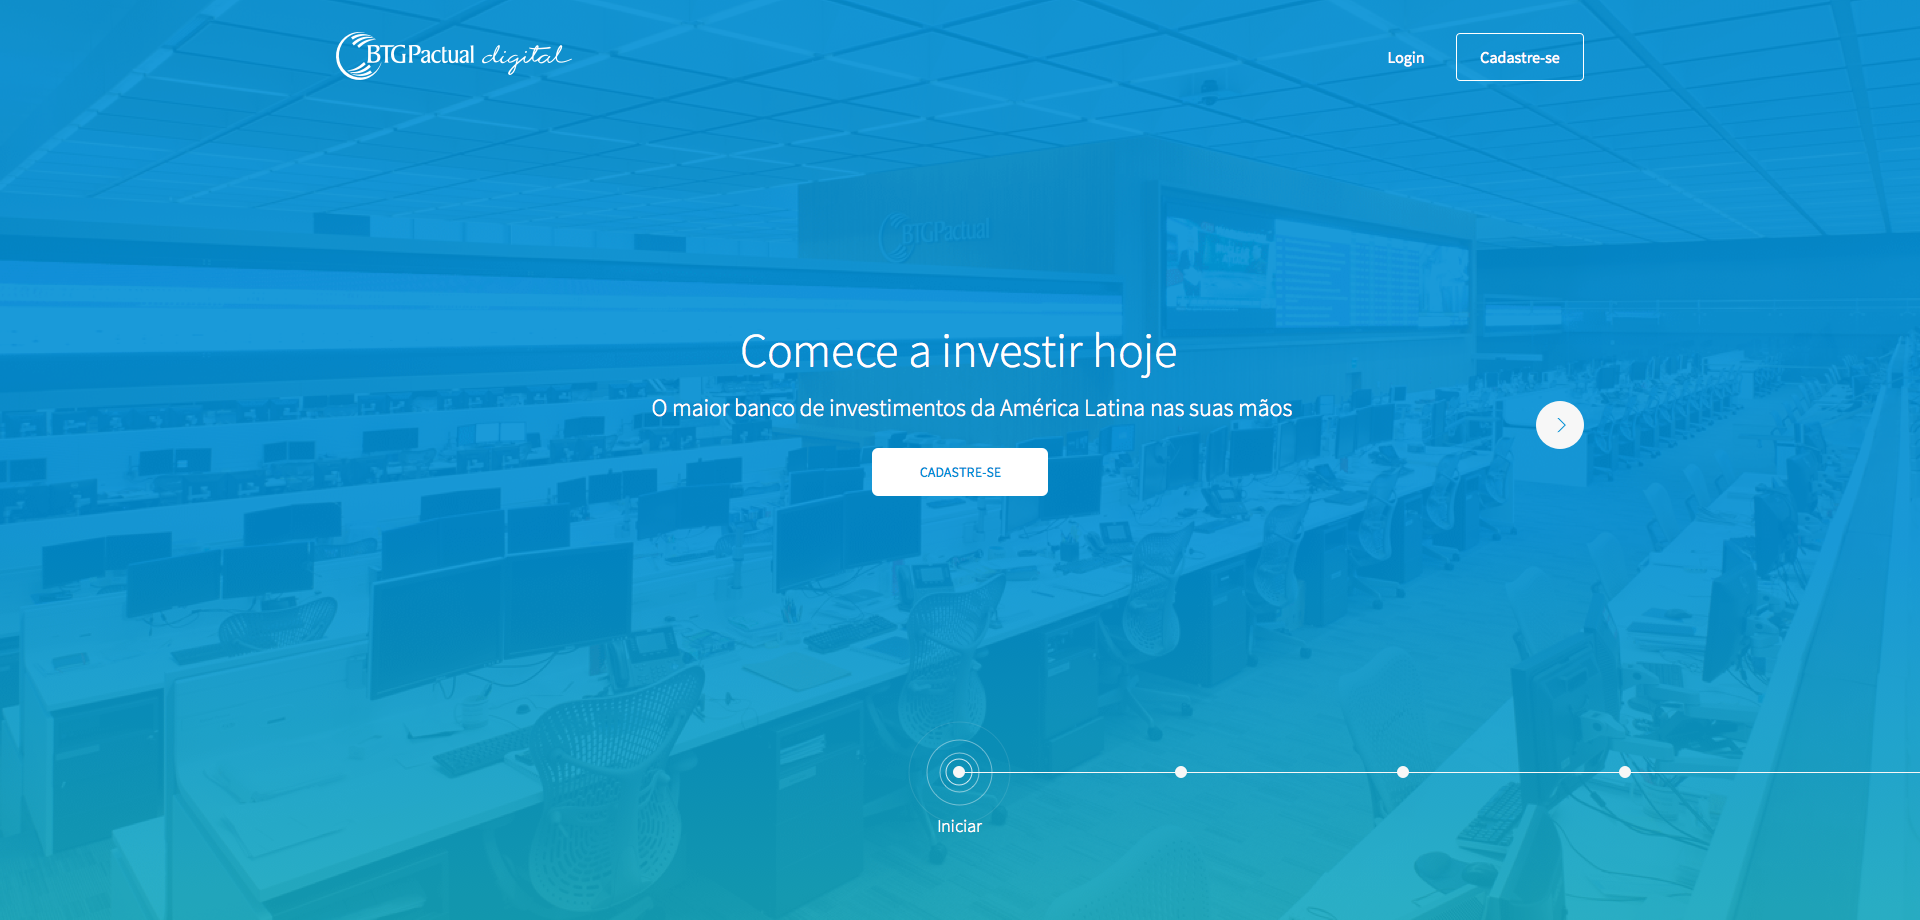 BTG-PACTUAL-Landing page-A0.png